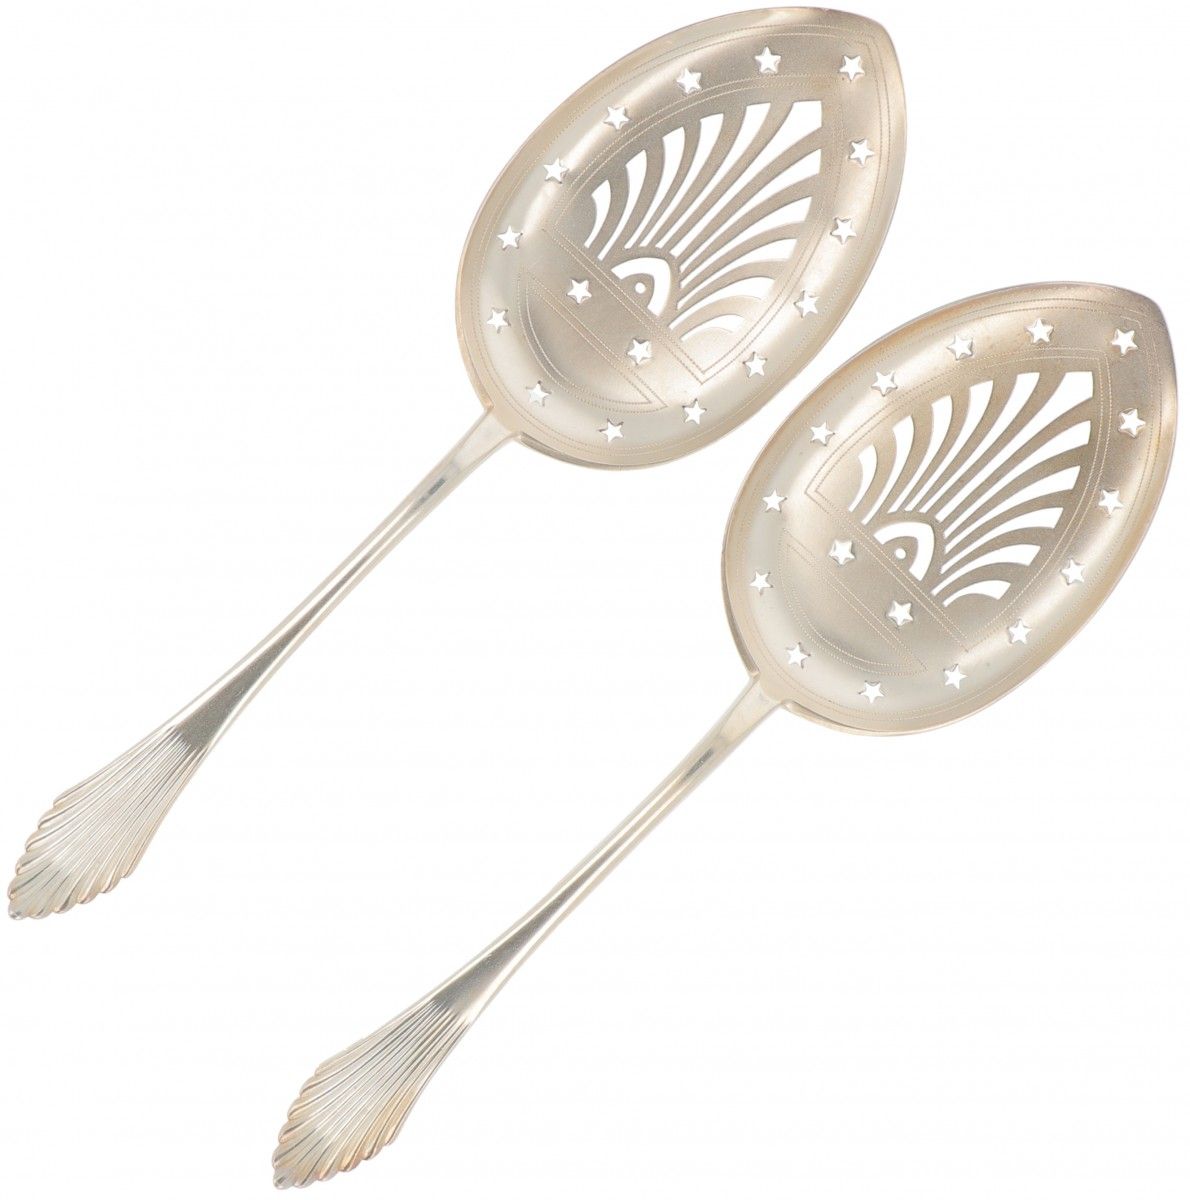 (2) piece set silver spoons. With fan-shaped handle terminal and partly openwork&hellip;